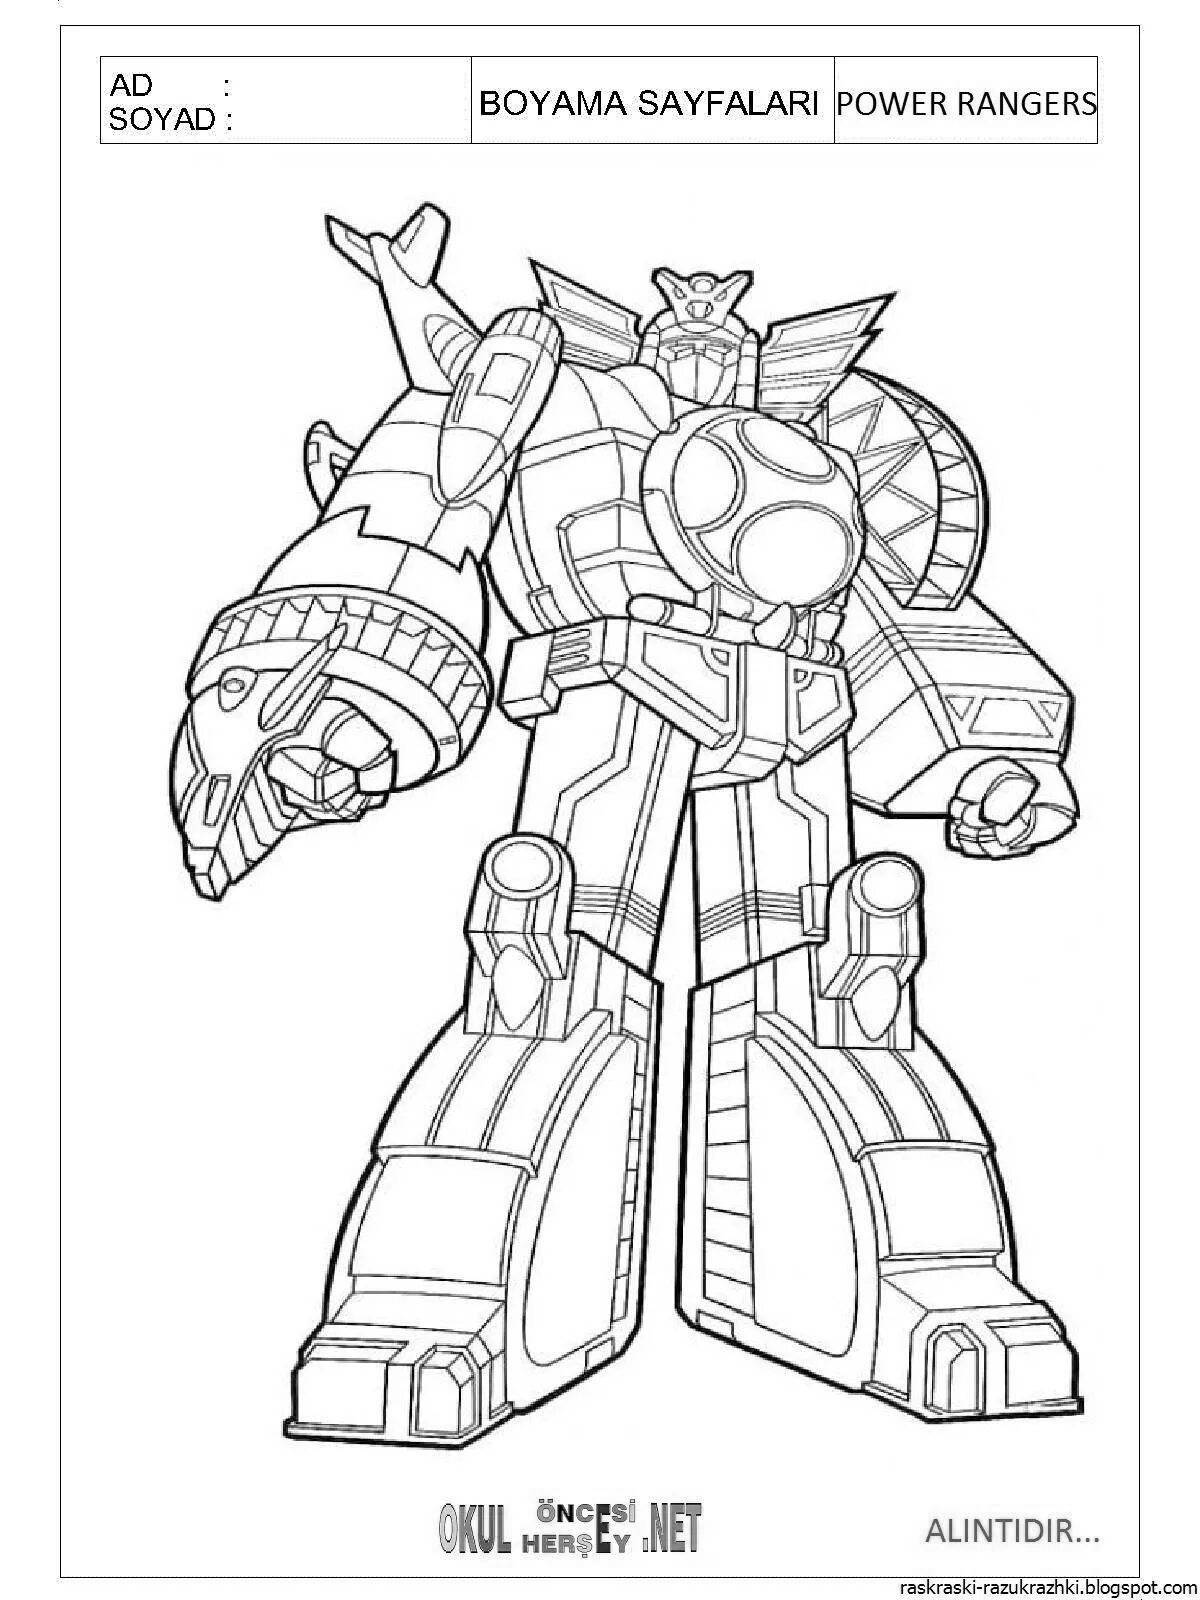 Adorable Transformers coloring pages for 6-7 year olds